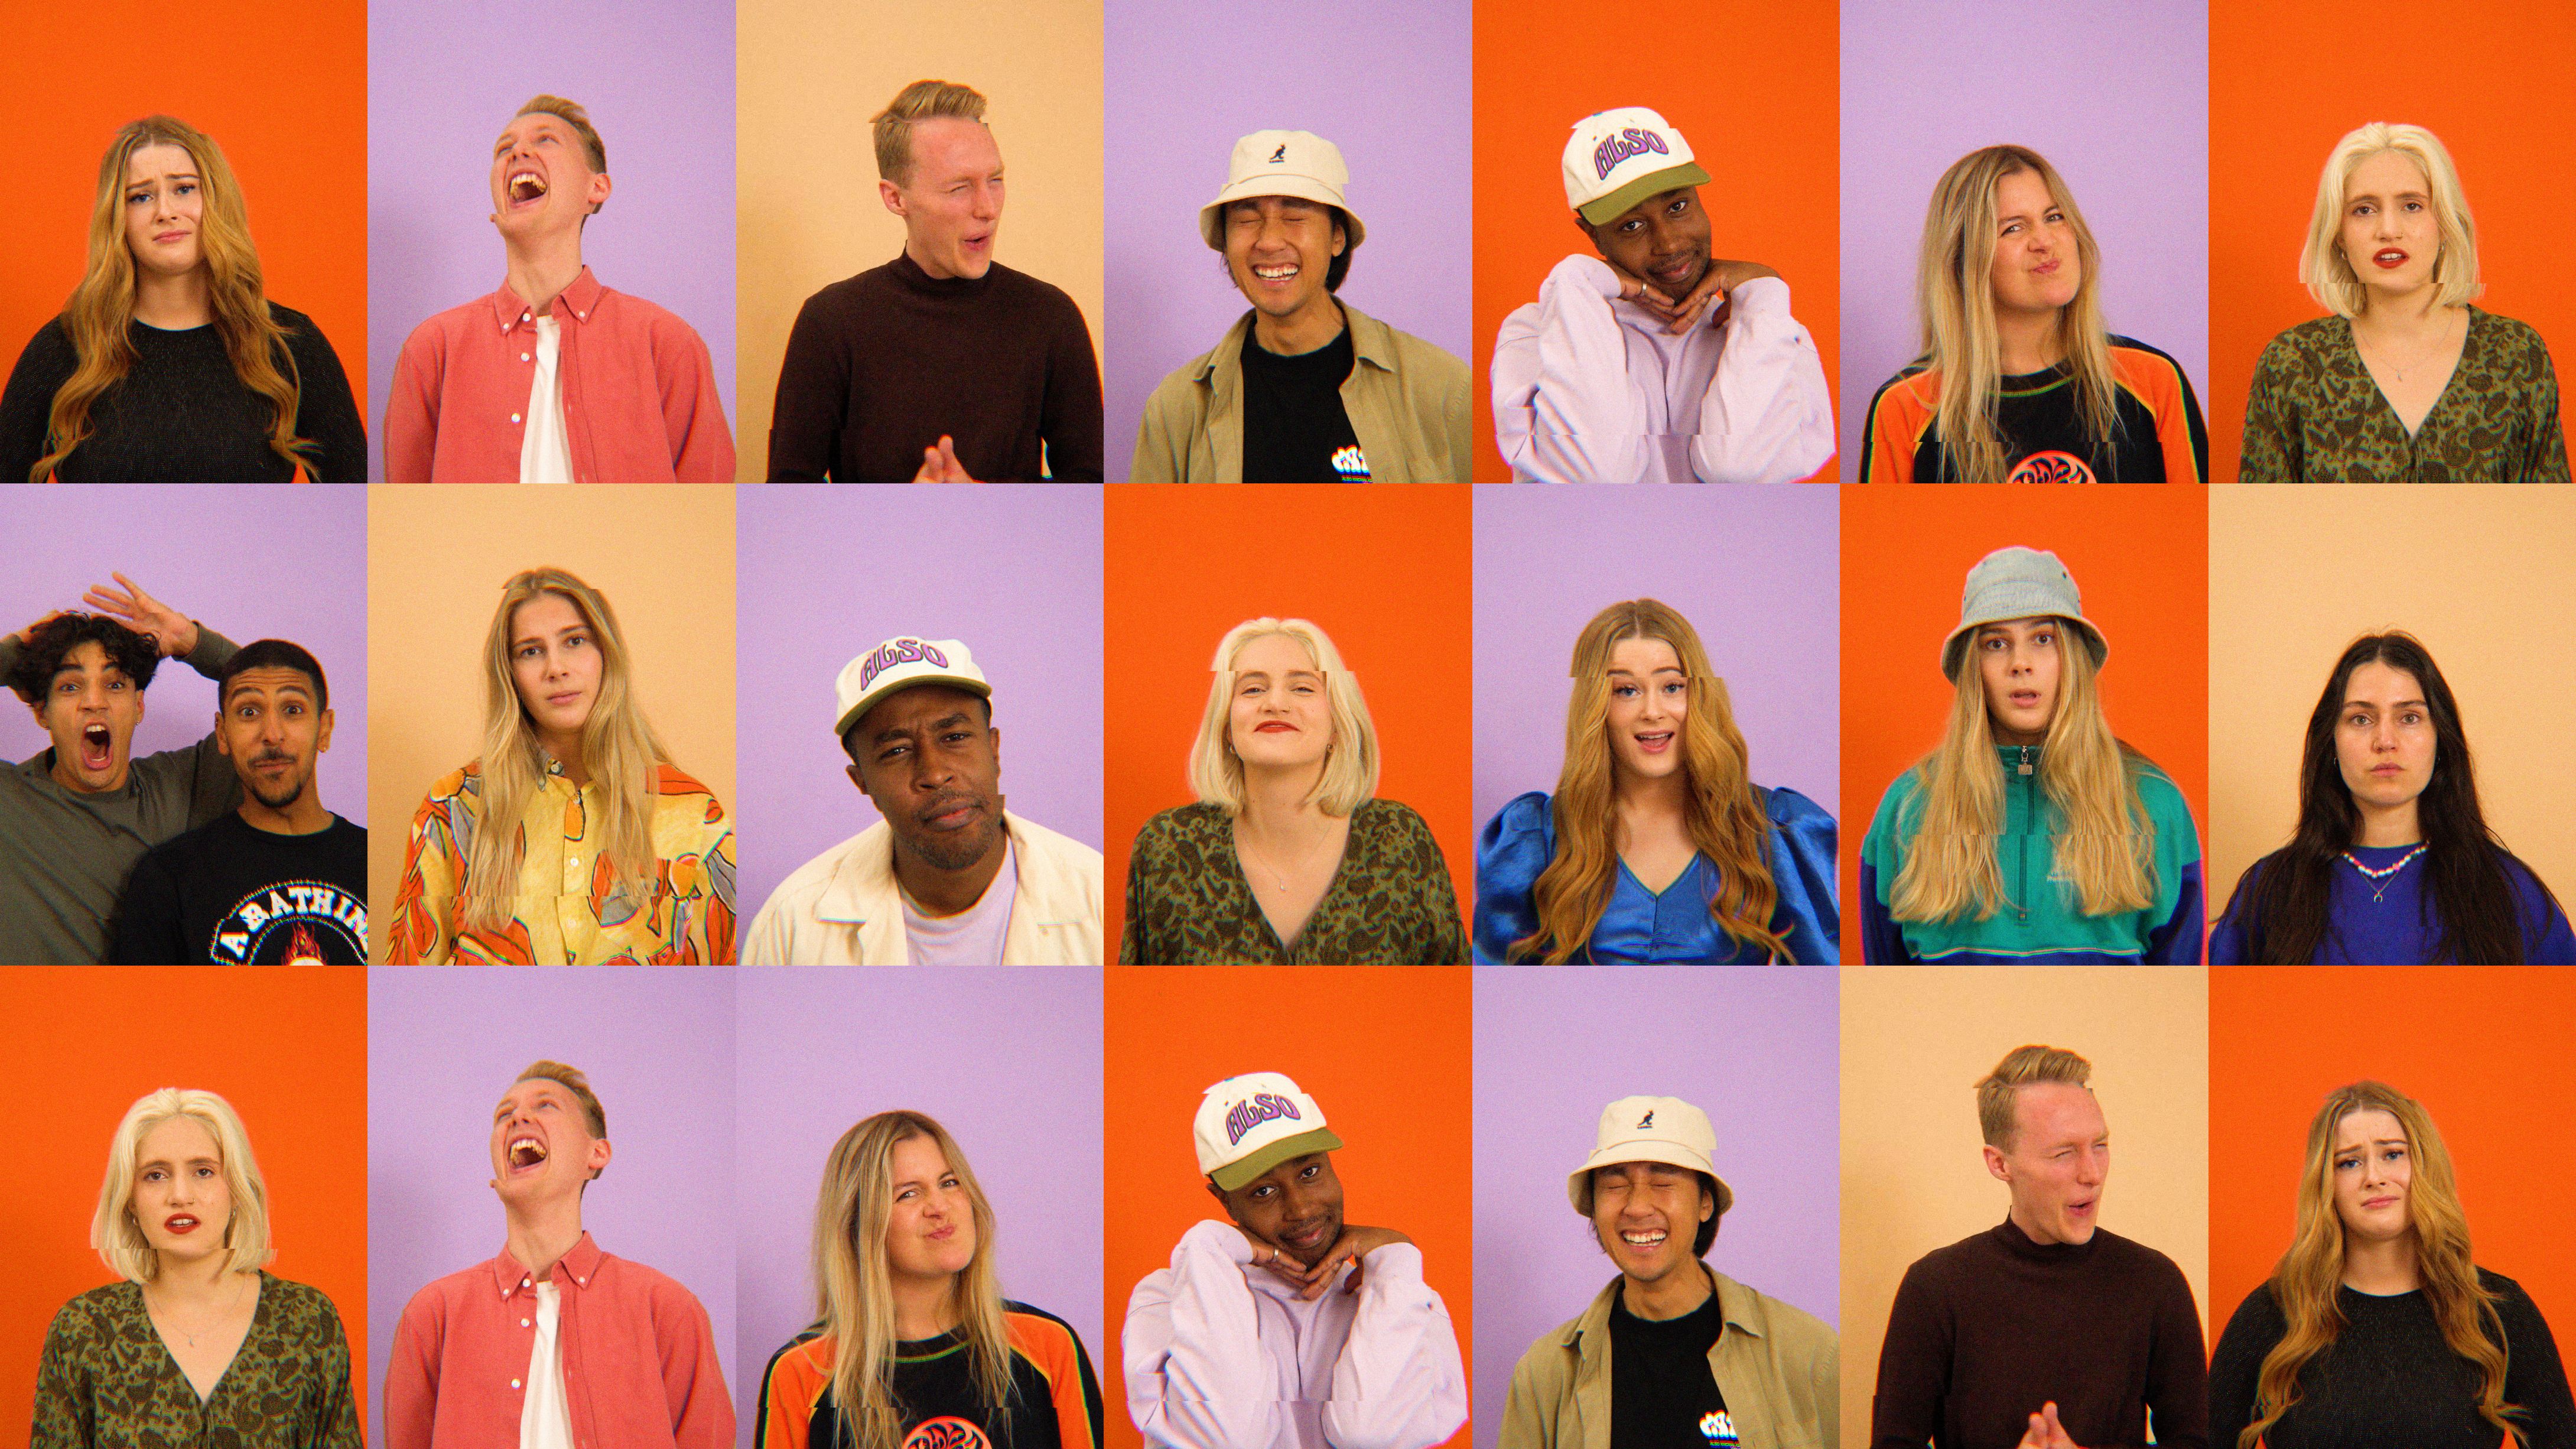 Colourful portraits of young people